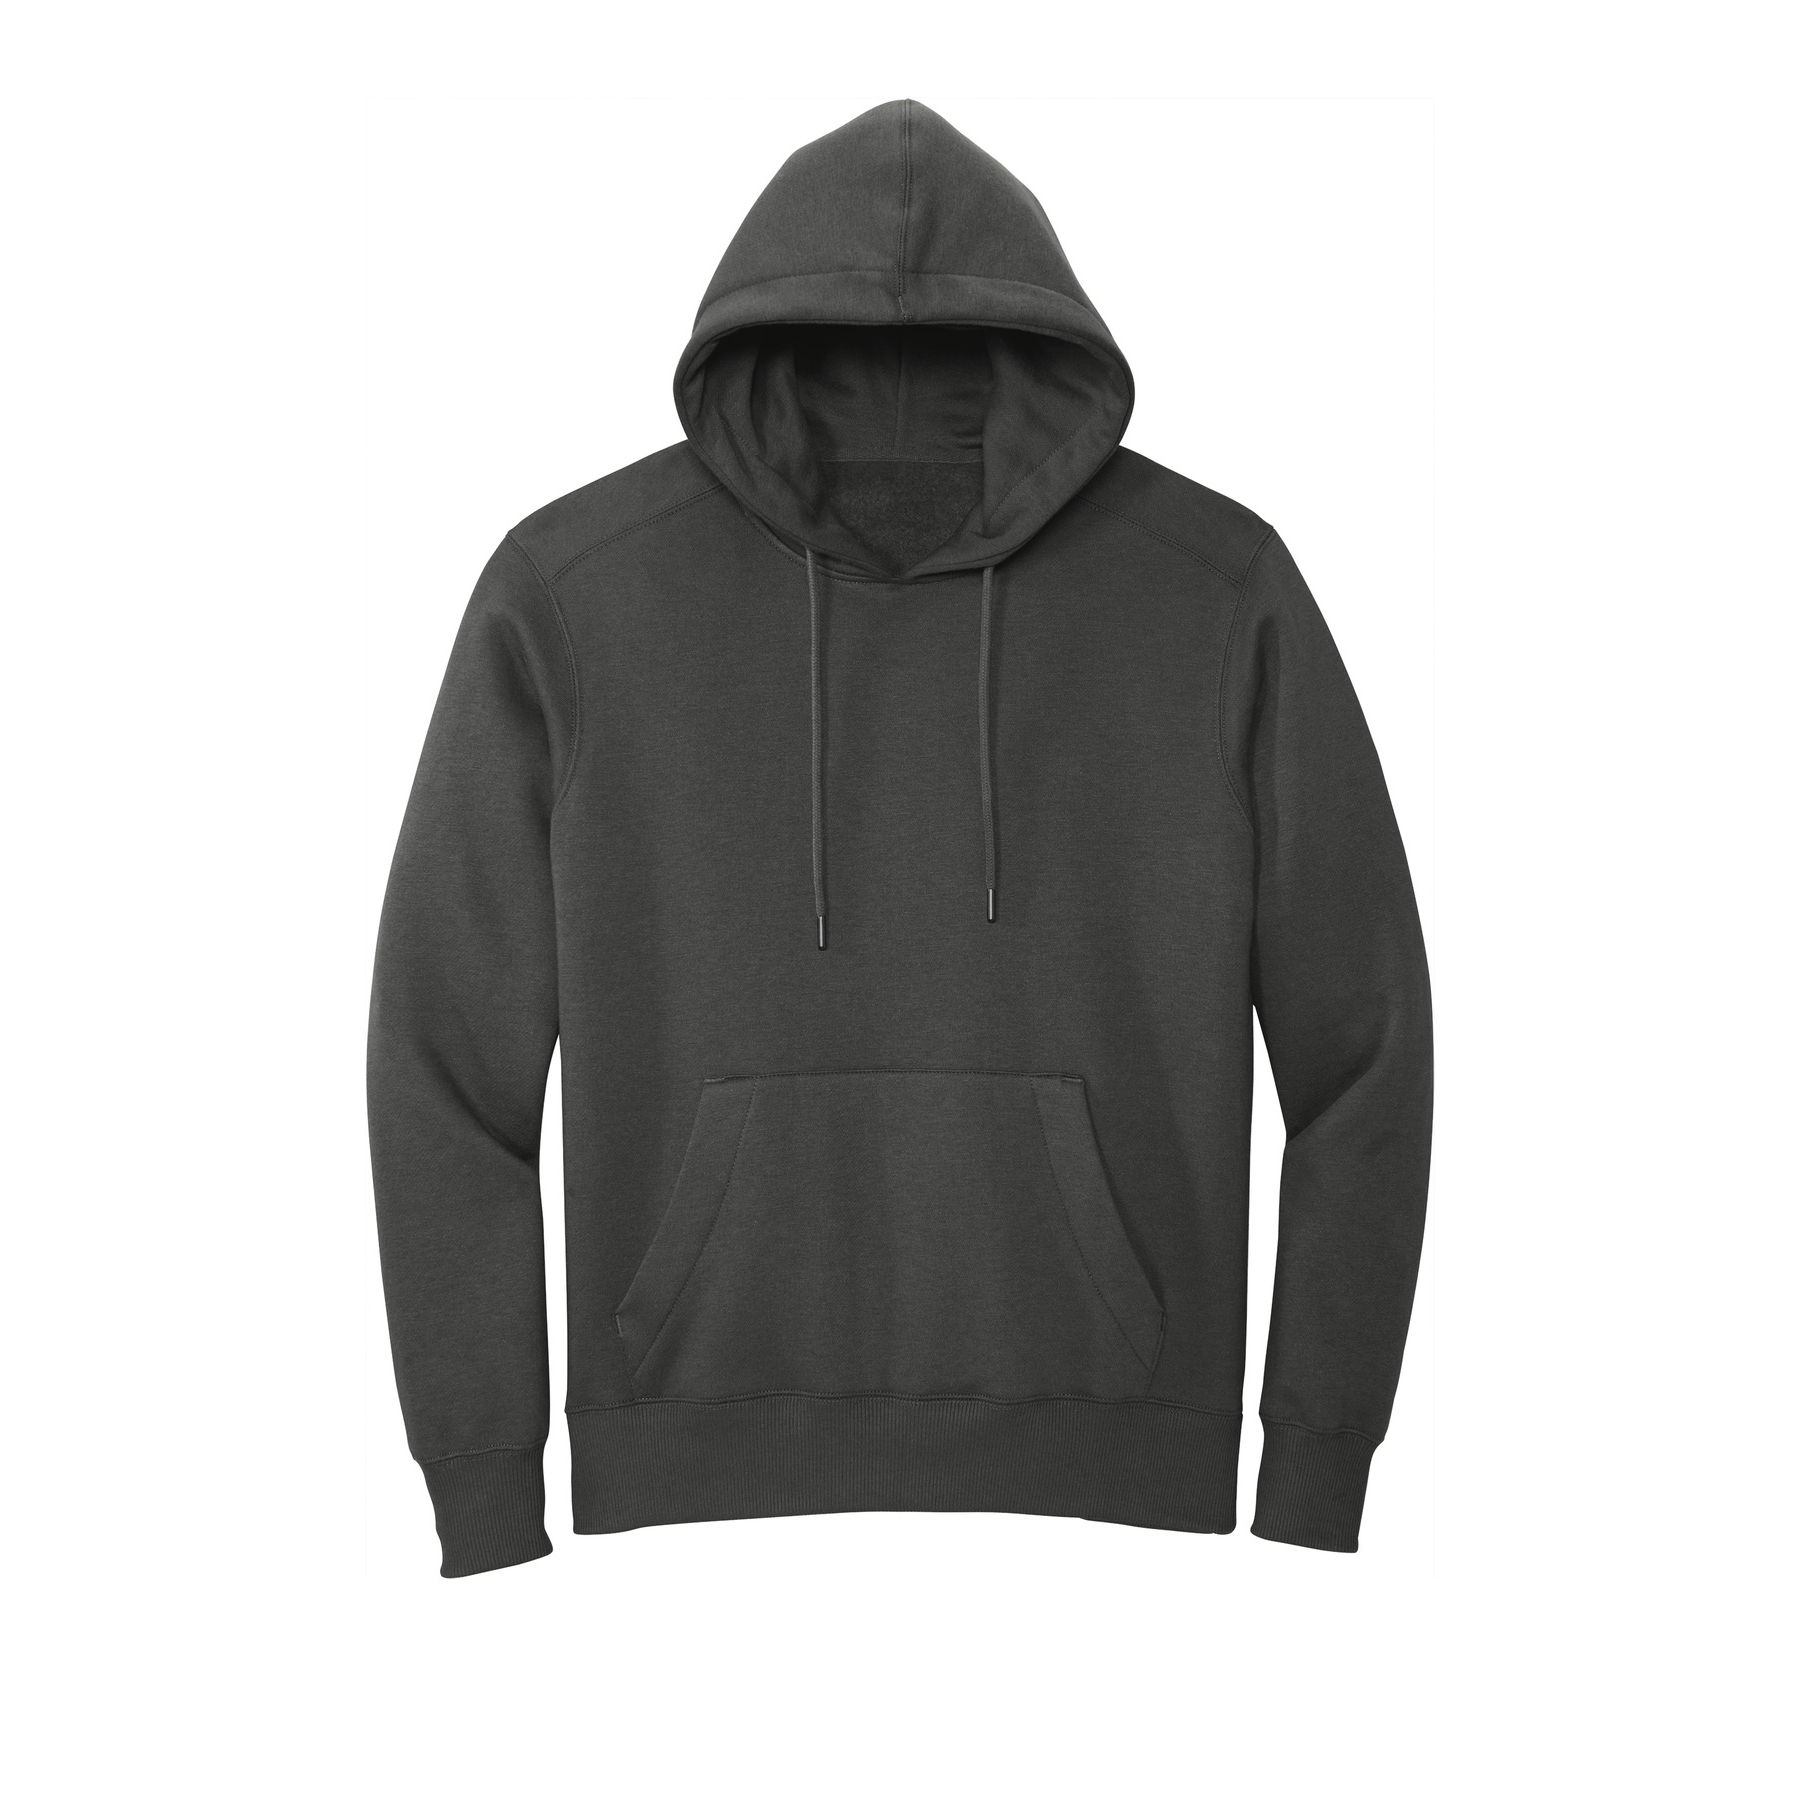 District ® Perfect Weight ® Fleece Hoodie DT1101 | Colman and Company